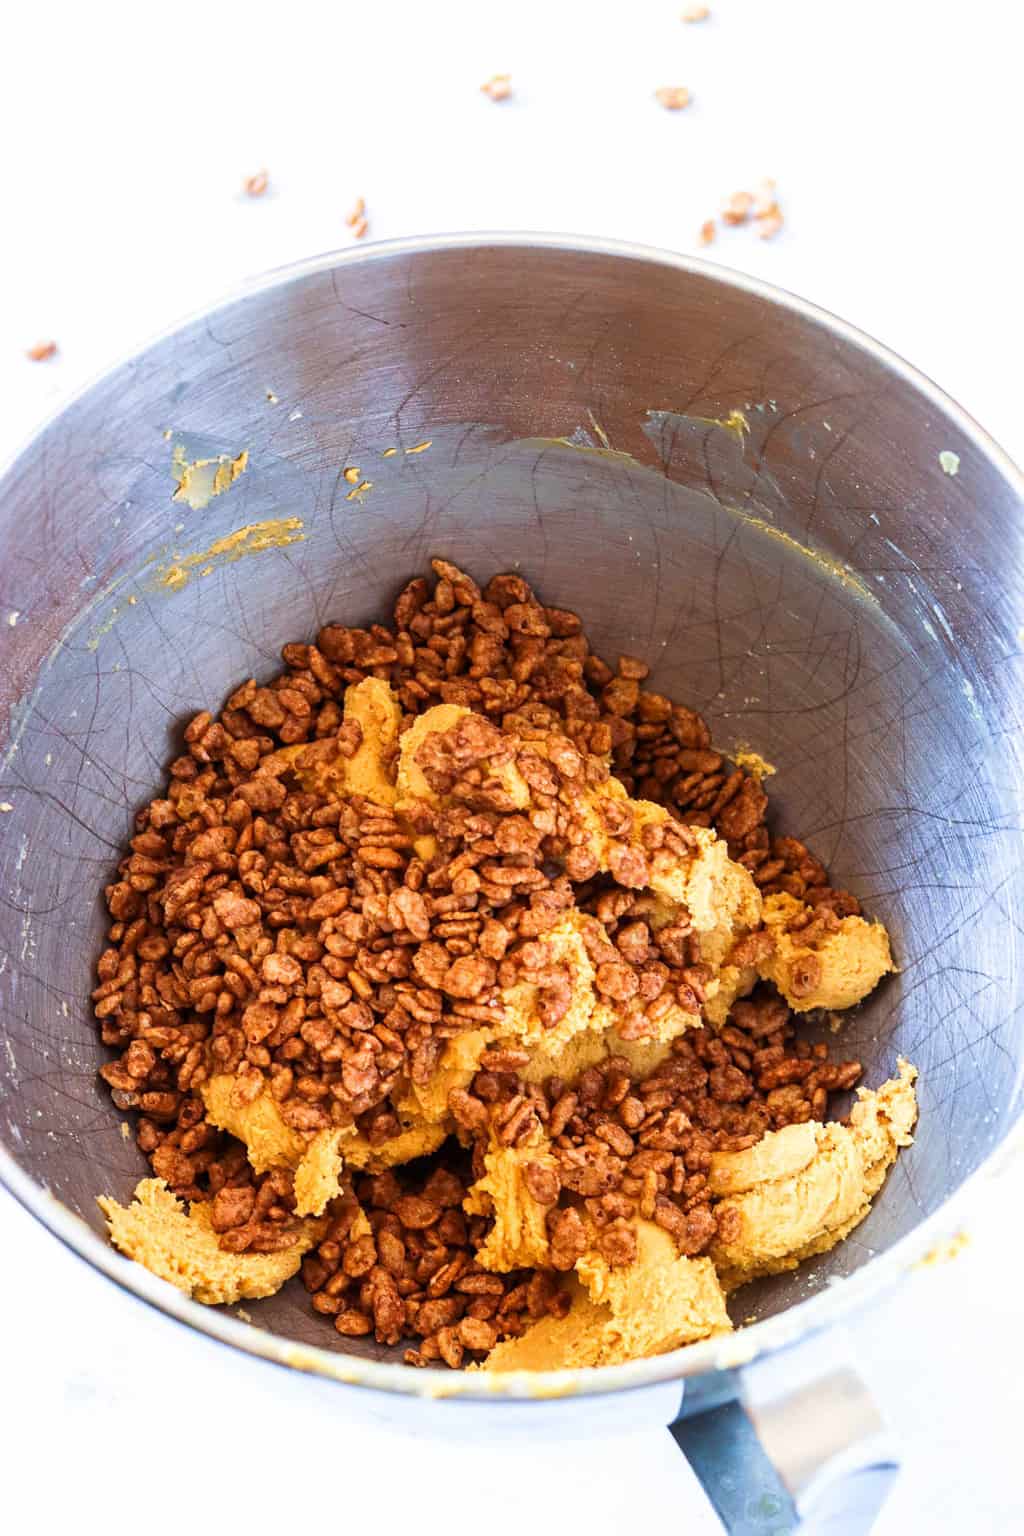 An overhead shot of a mixing bowl of peanut butter dough with cocoa krispies